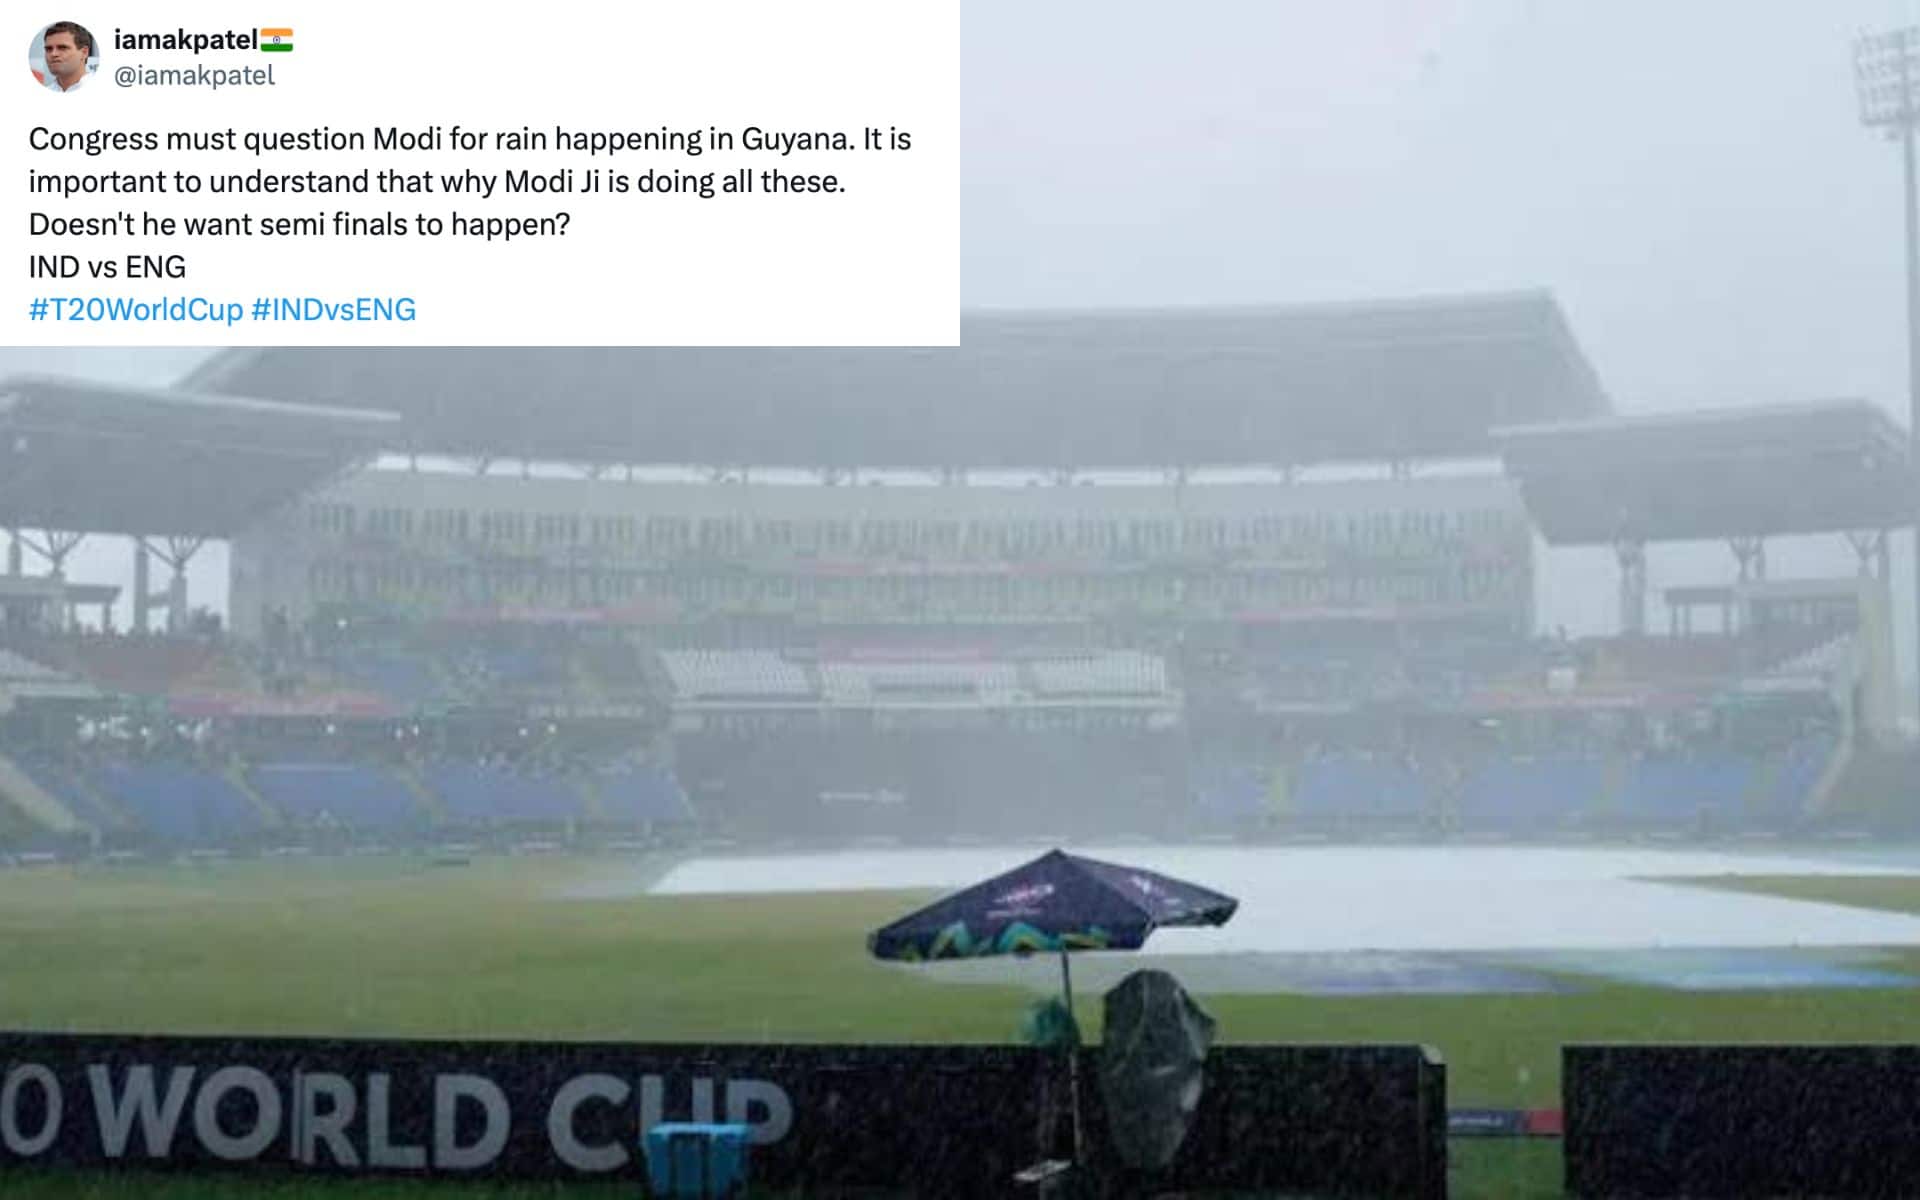 IND vs ENG weather conditions today (x.com)